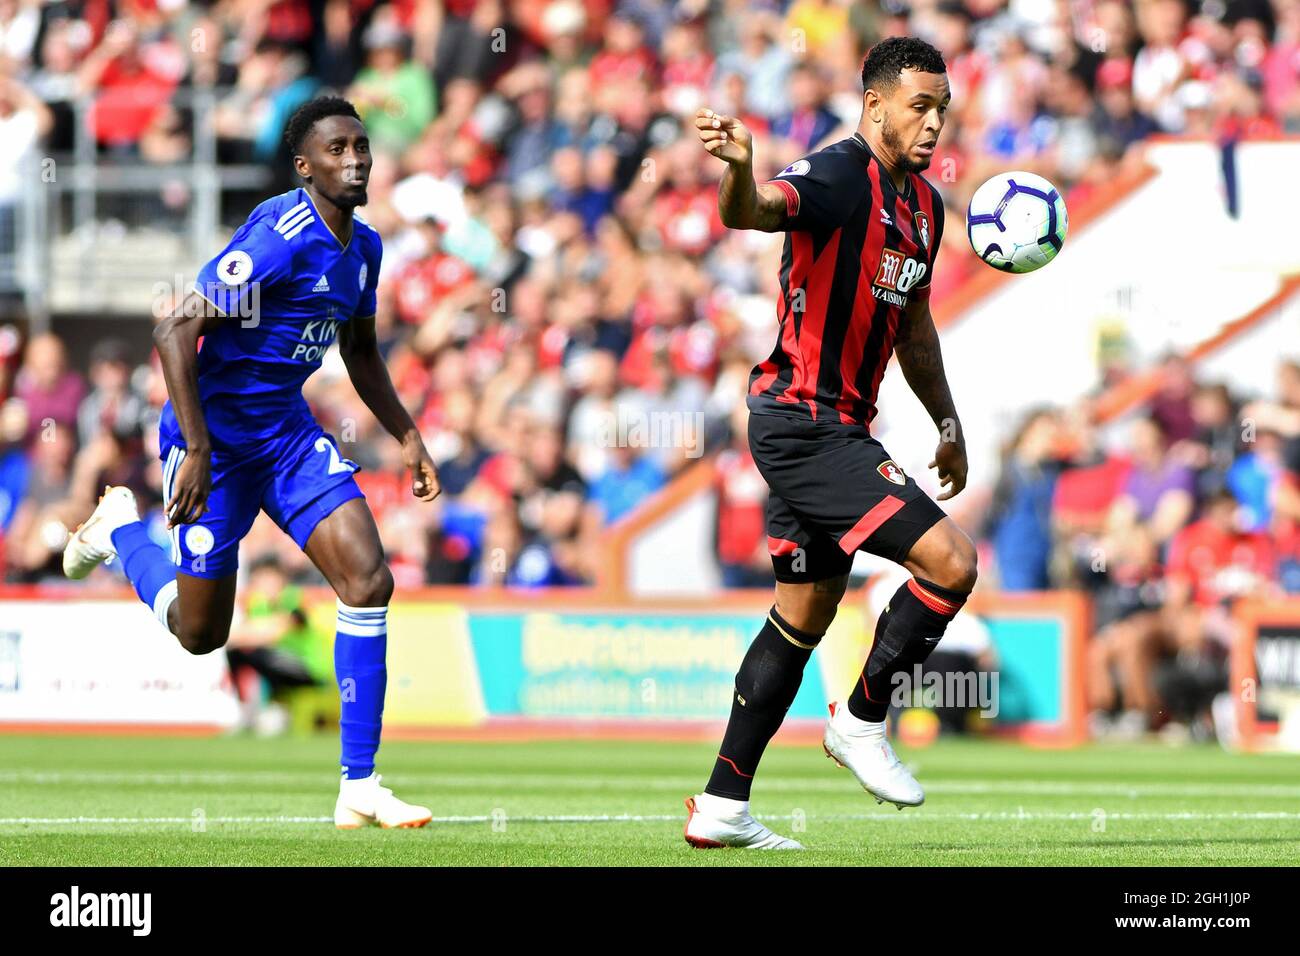 Joshua King, of AFC Bournemouth bursts past Wilfred Ndidi of Leicester City - AFC Bournemouth v Leicester City, Premier League, Vitality Stadium, Bournemouth - 15th September 2018 Stock Photo